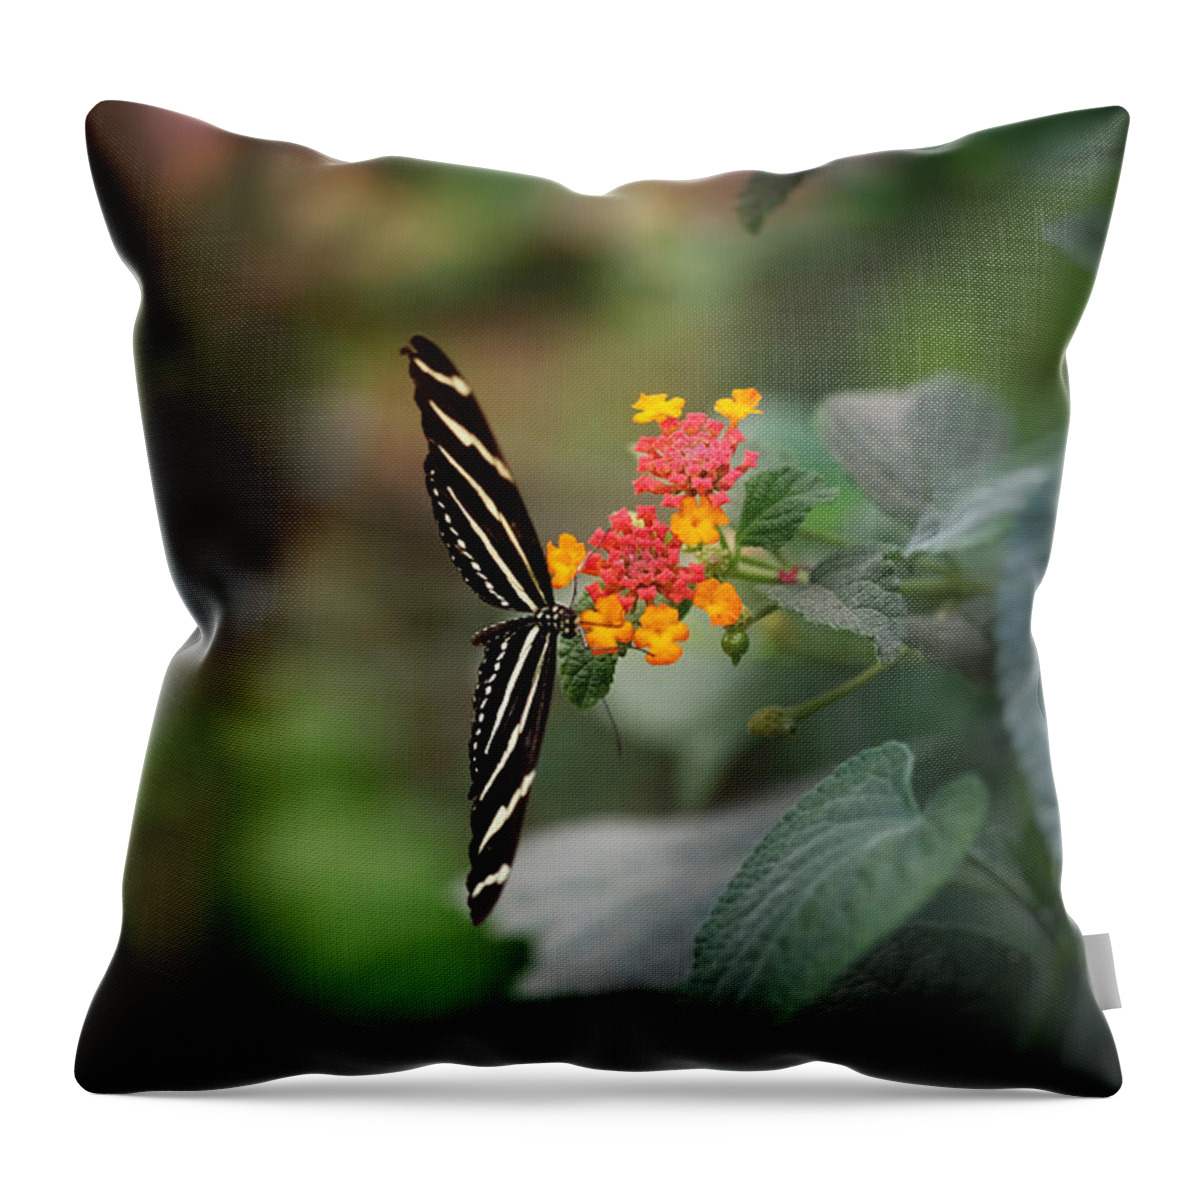 Arizona Throw Pillow featuring the photograph At Last by Lucinda Walter